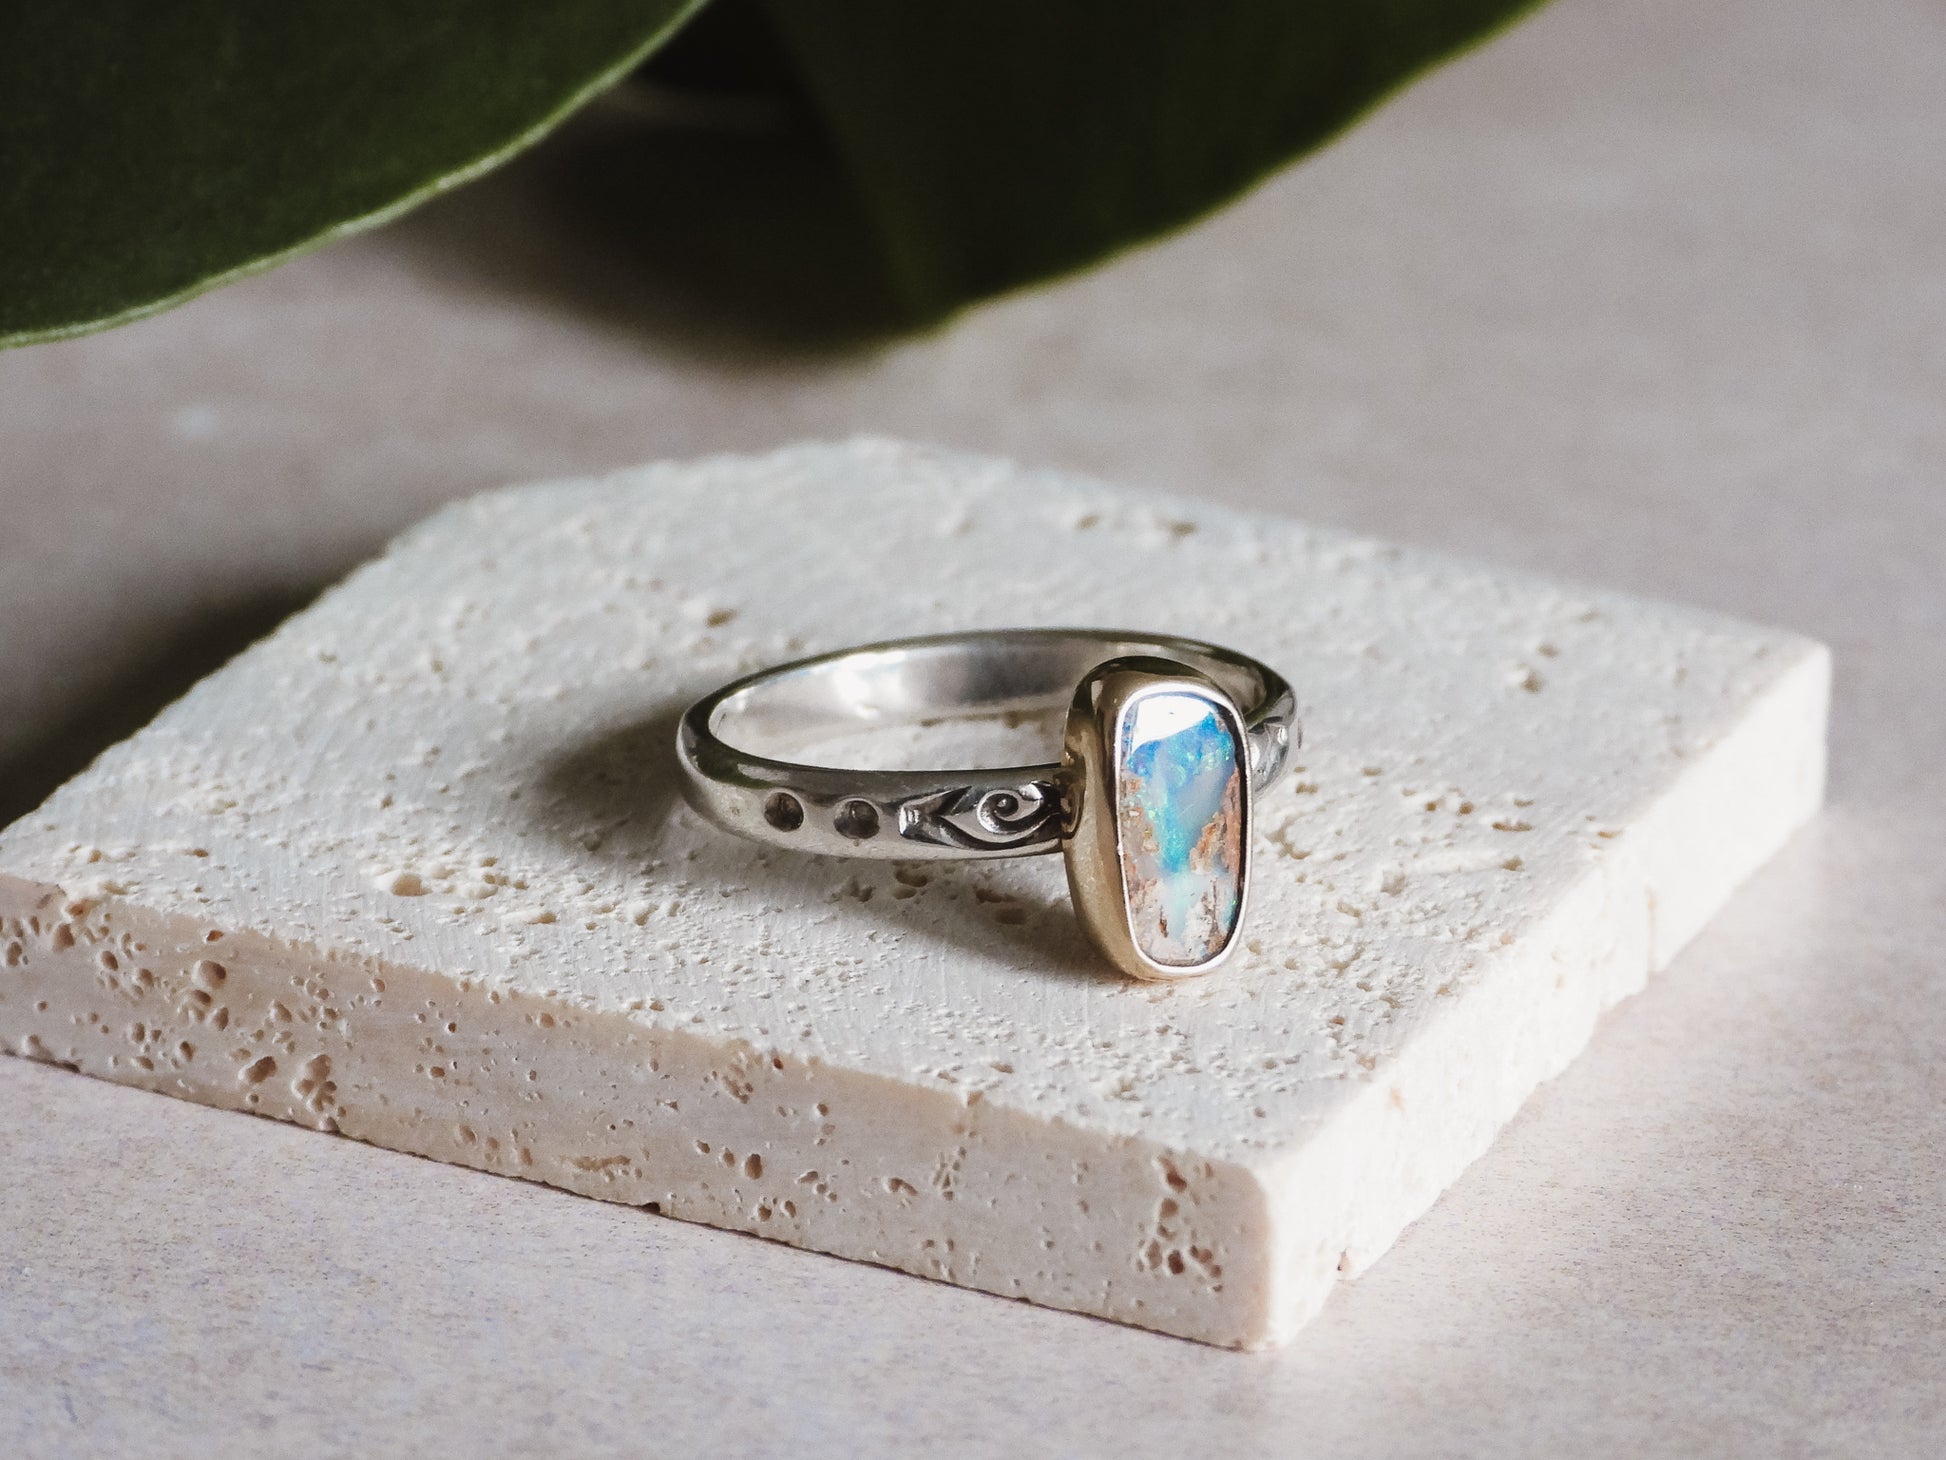 blue boulder opal ring made by Ula Jewellery